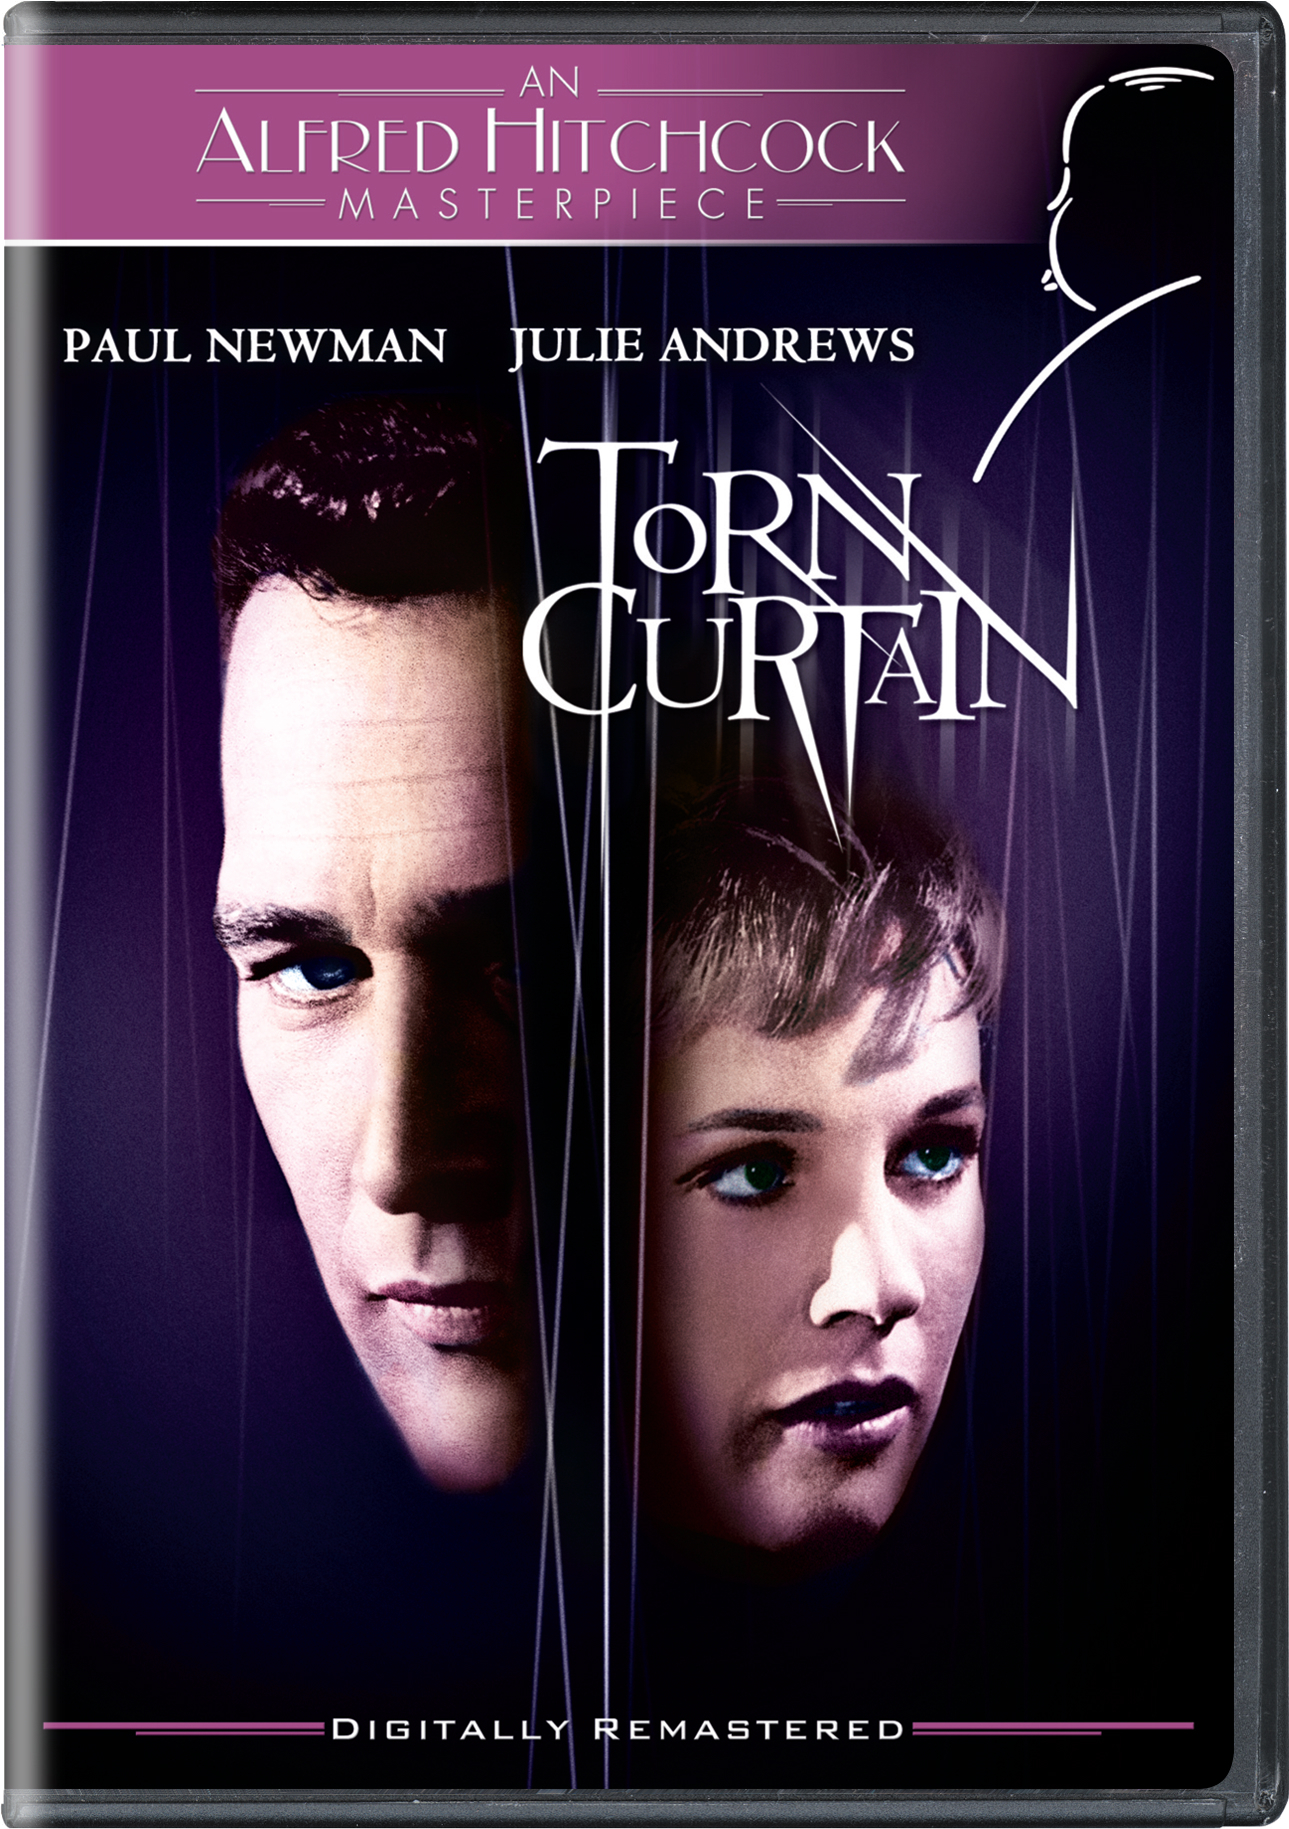 Torn Curtain - DVD [ 1966 ]  - Modern Classic Movies On DVD - Movies On GRUV